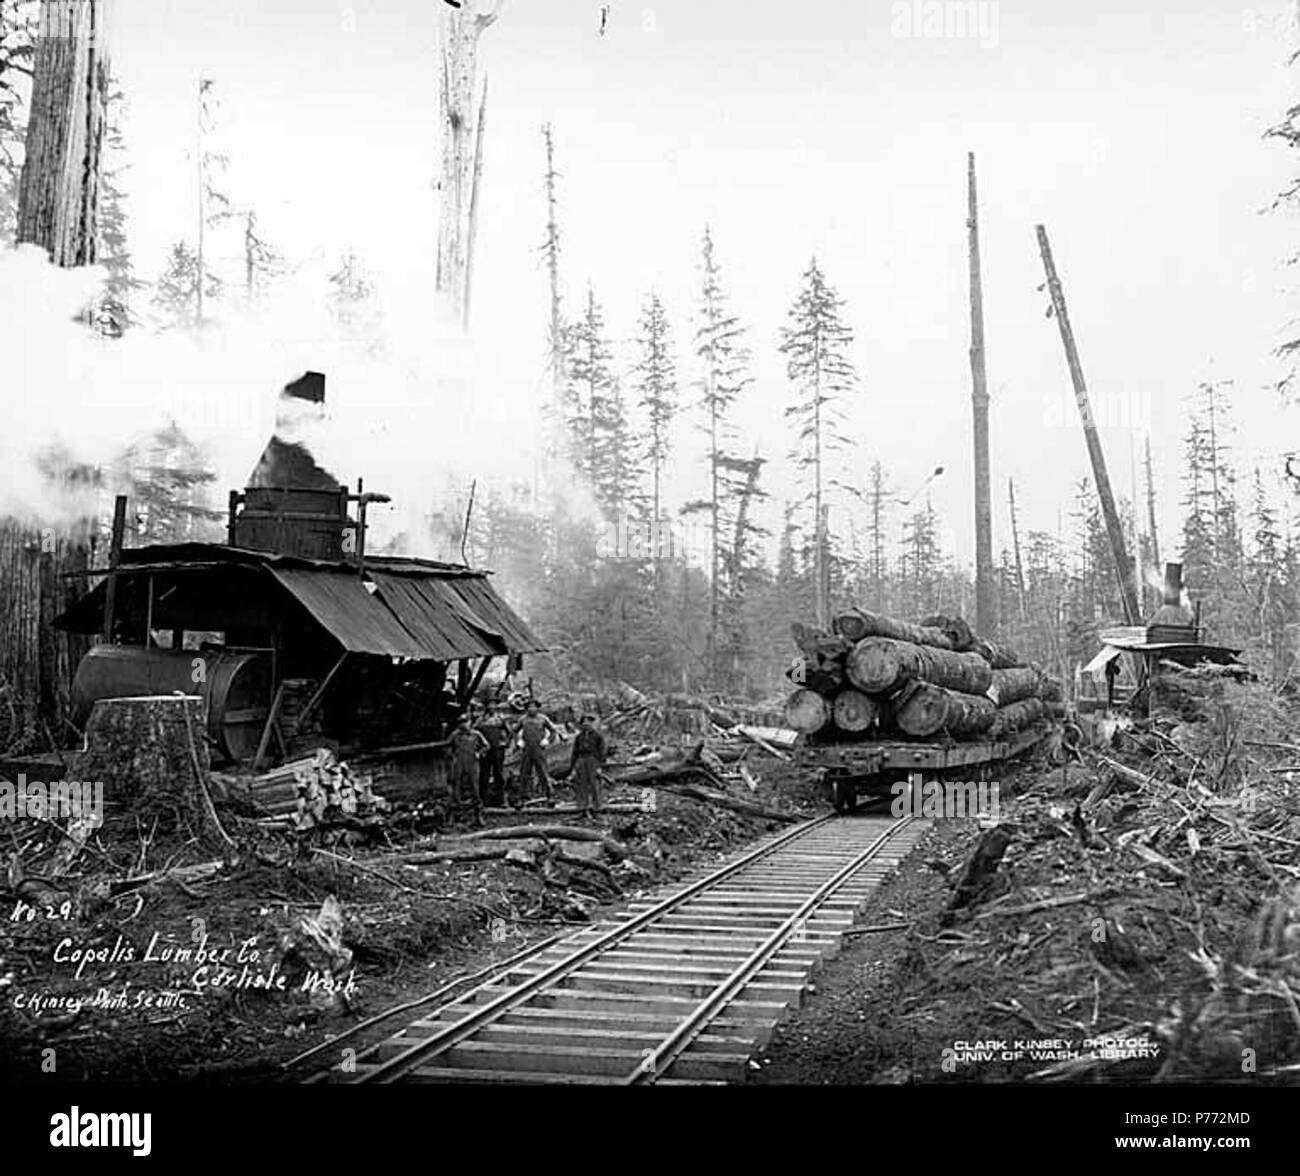 . English: Crew with donkey engine and loaded flatcar, Copalis Lumber Company, near Carlisle, ca. 1917 . English: Caption on image: Copalis Lumber Co., Carlisle, Wash. C. Kinsey Photo, Seattle. No. 29 PH Coll 516.811 The Copalis Lumber Company was in business in Carlisle from 1914 to 1920. It's logging railroad was absorbed into the Carlisle Lumber Company. Carlisle is a small settlement on the Copalis River four miles east of the Pacific Ocean in southwest Grays Harbor County. When established in 1912 by the Carlisle Lumber Company, it was a busy logging and sawmill center. It continued to be Stock Photo